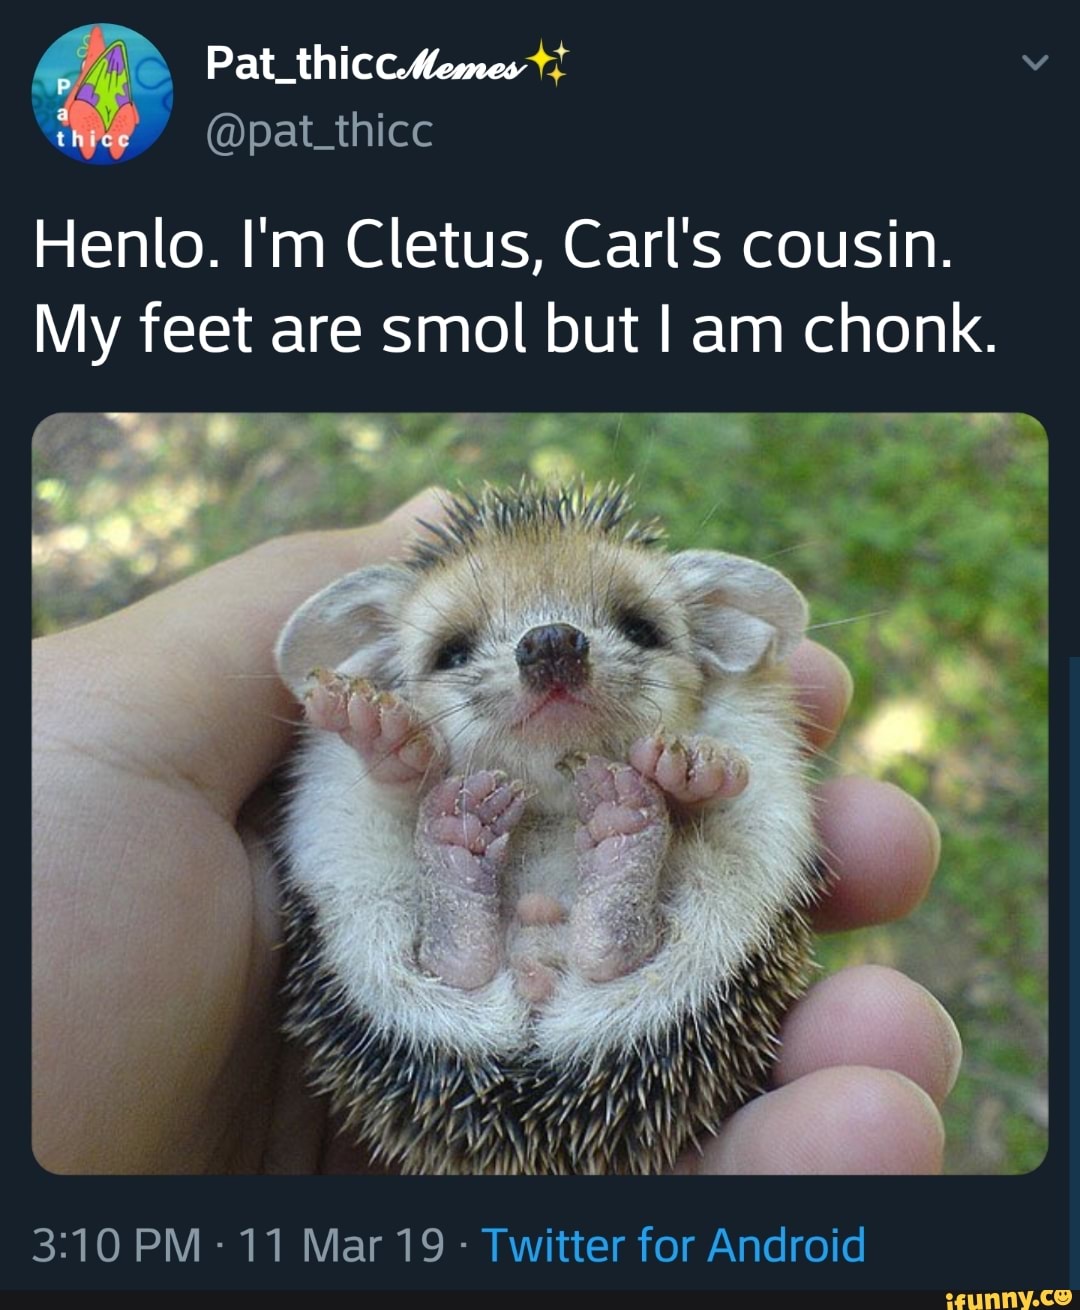 carl, hedgehog, animals, cute, wholesome, wholesomewednesday, relatable, lm...